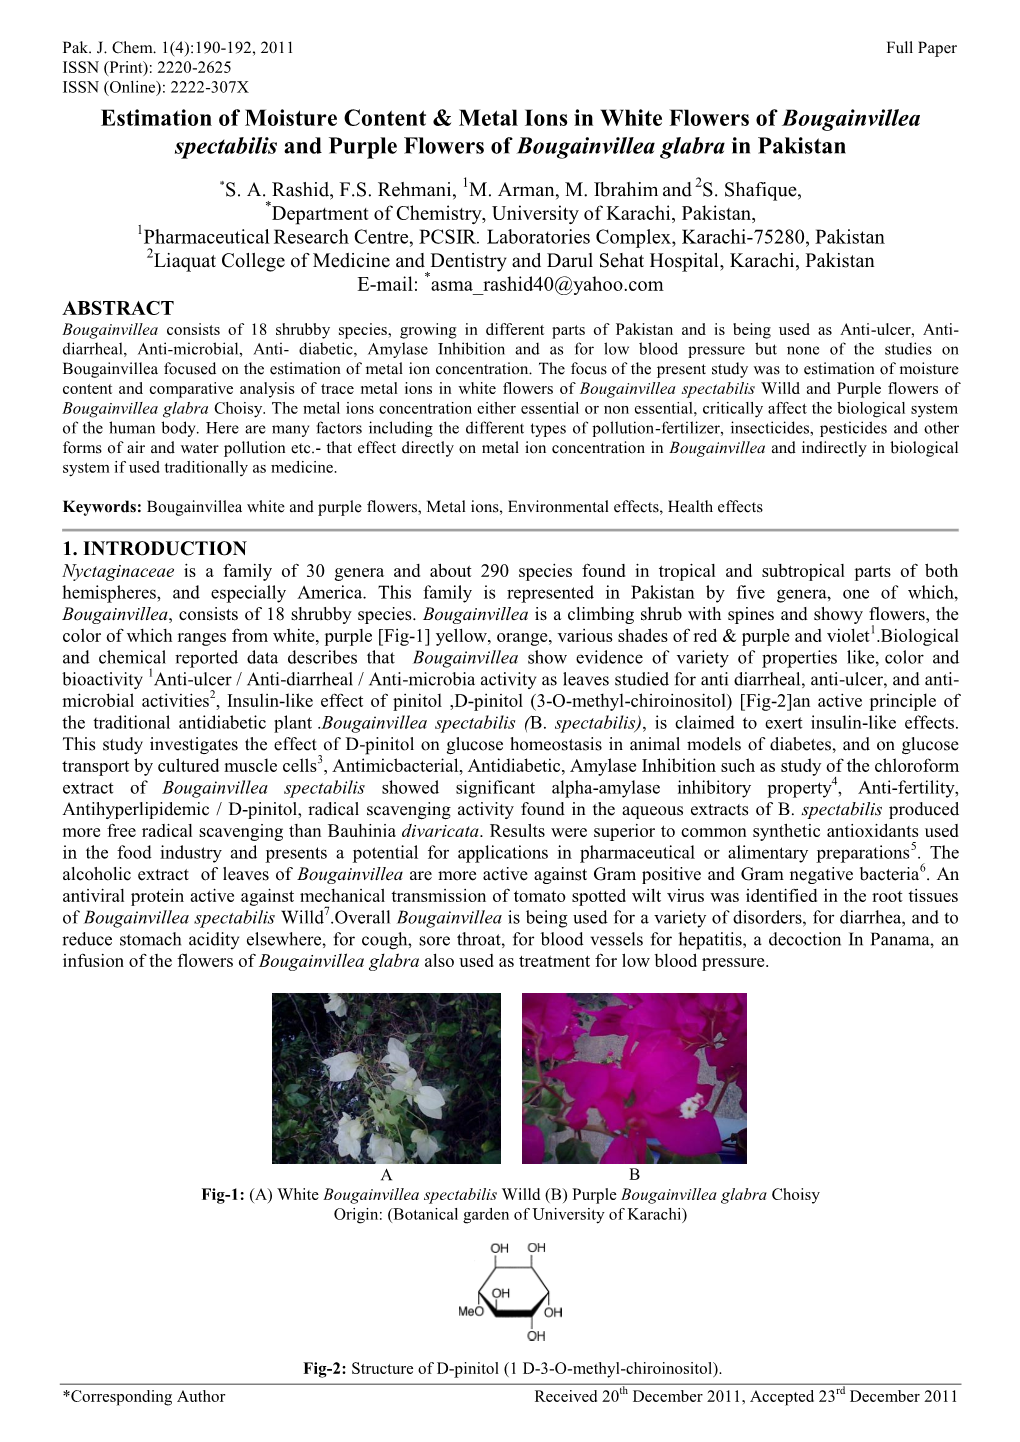 Estimation of Moisture Content & Metal Ions in White Flowers Of